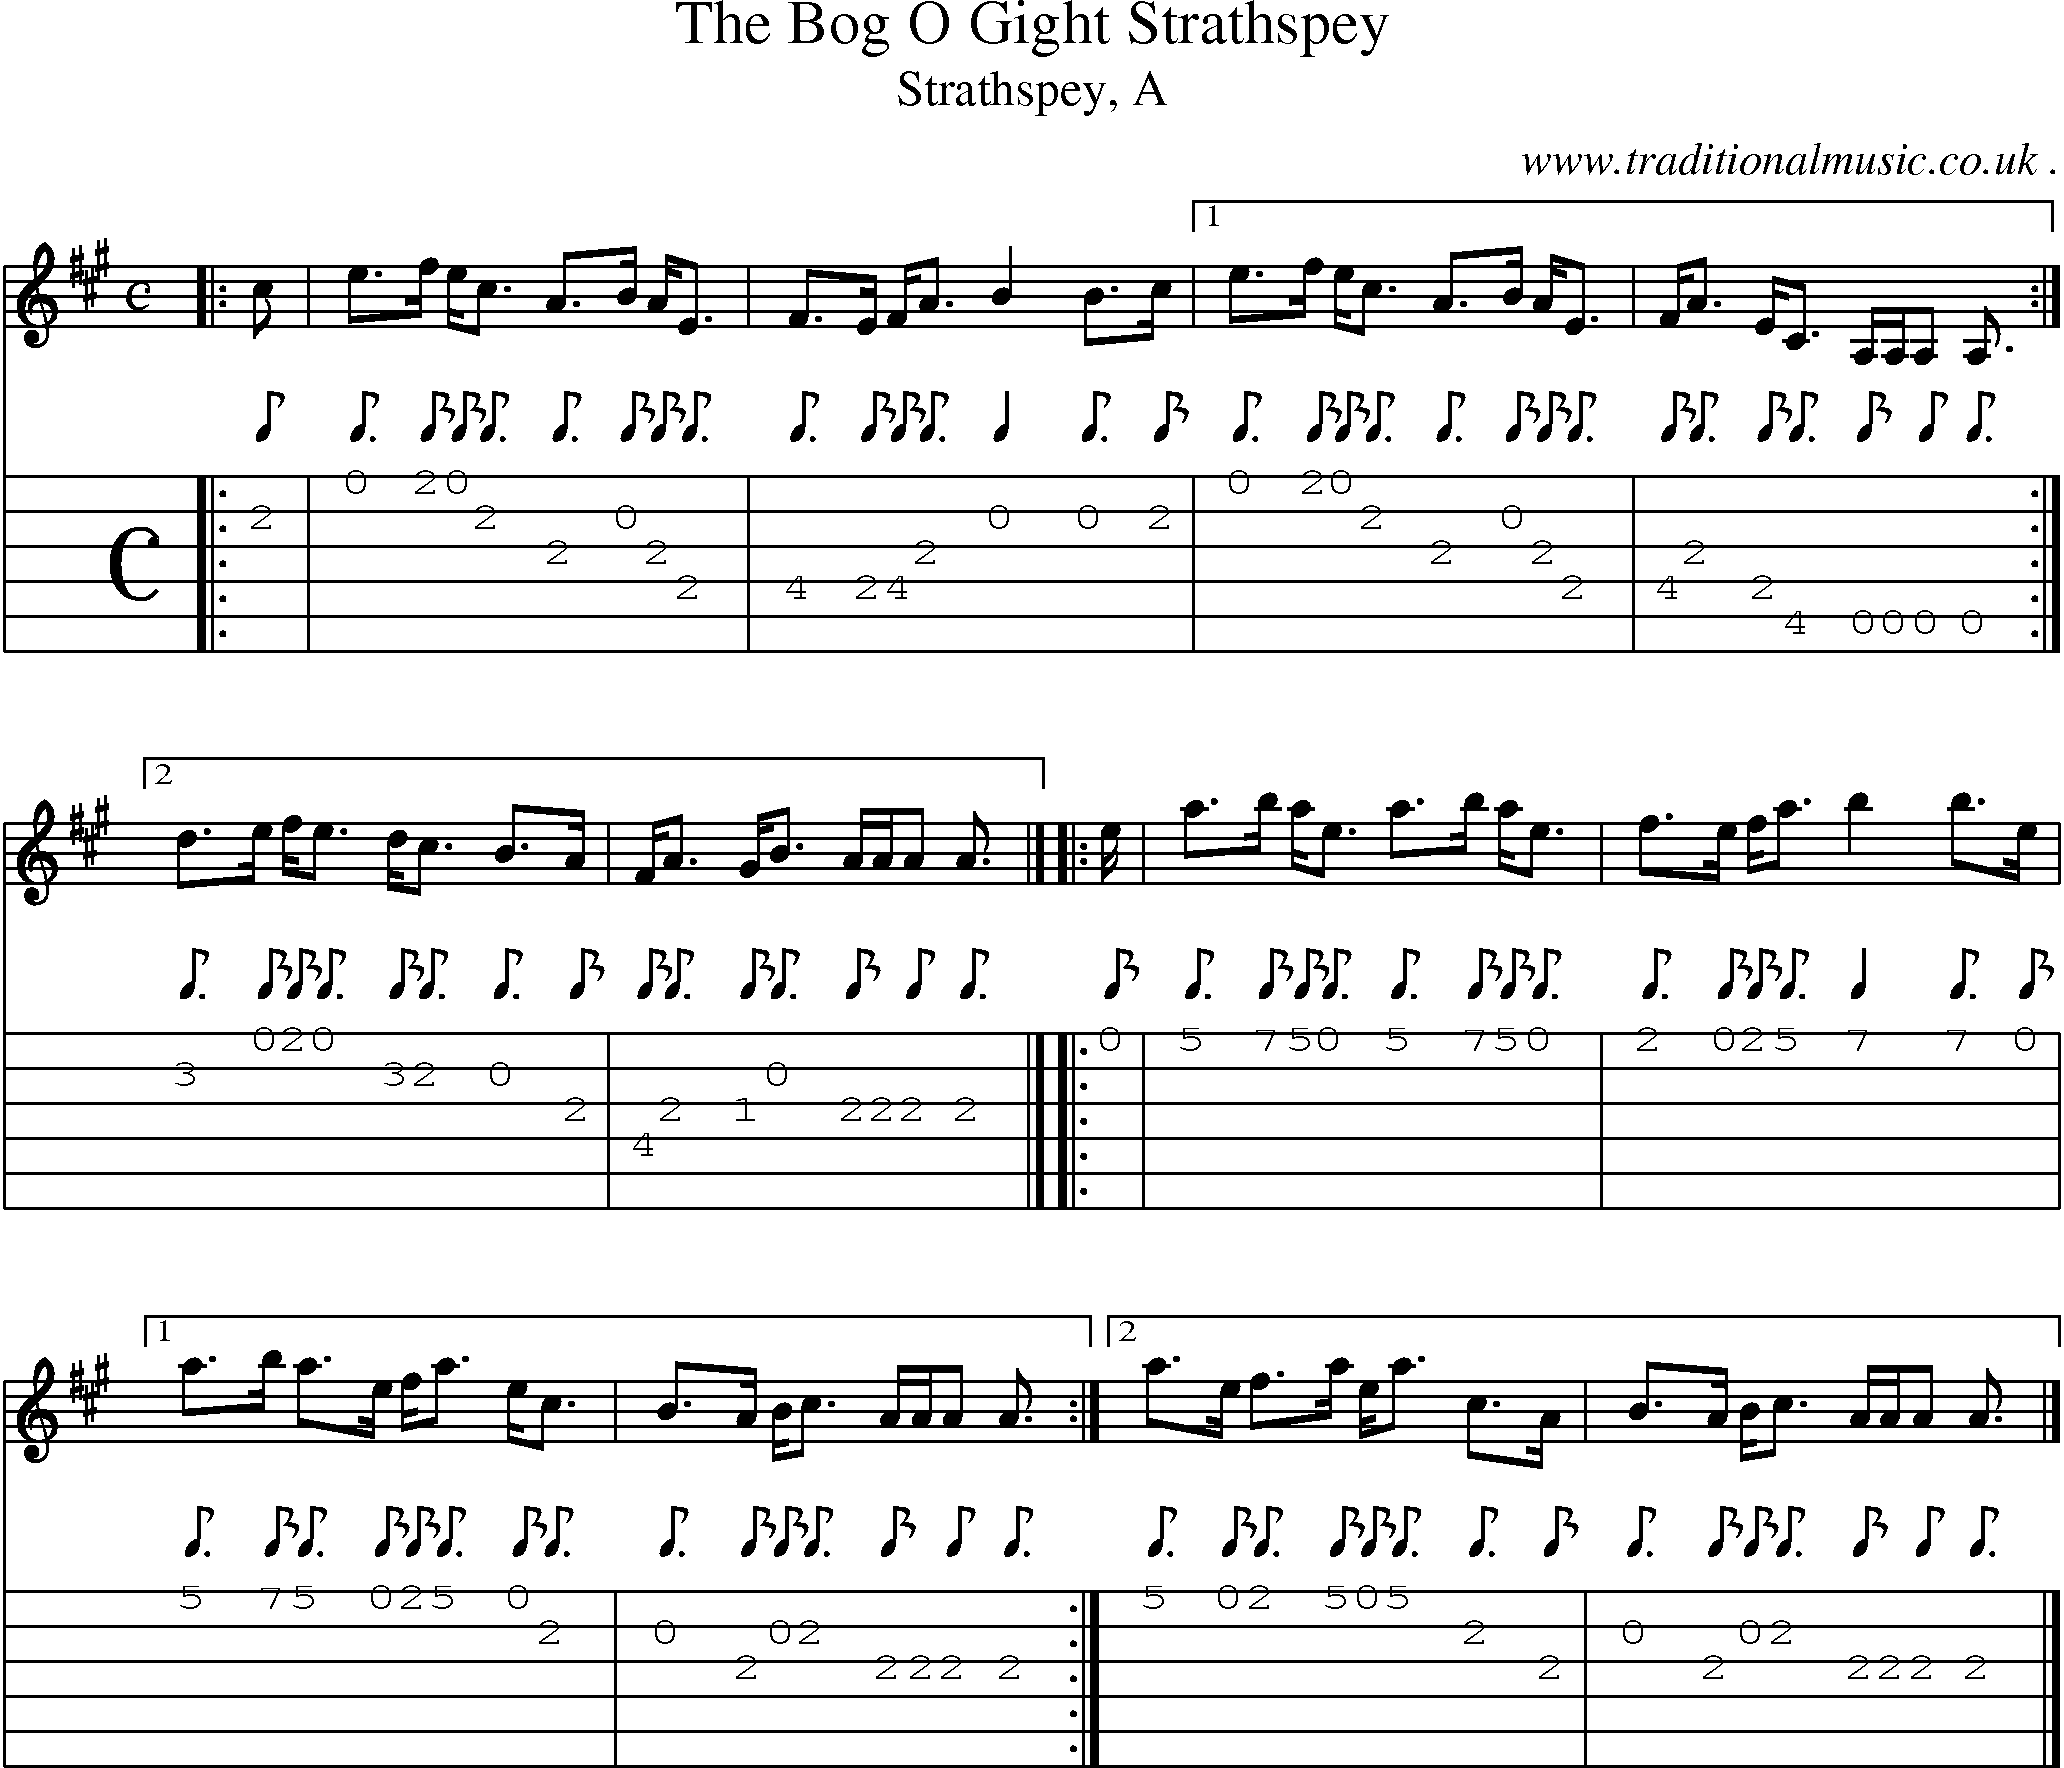 Sheet-music  score, Chords and Guitar Tabs for The Bog O Gight Strathspey